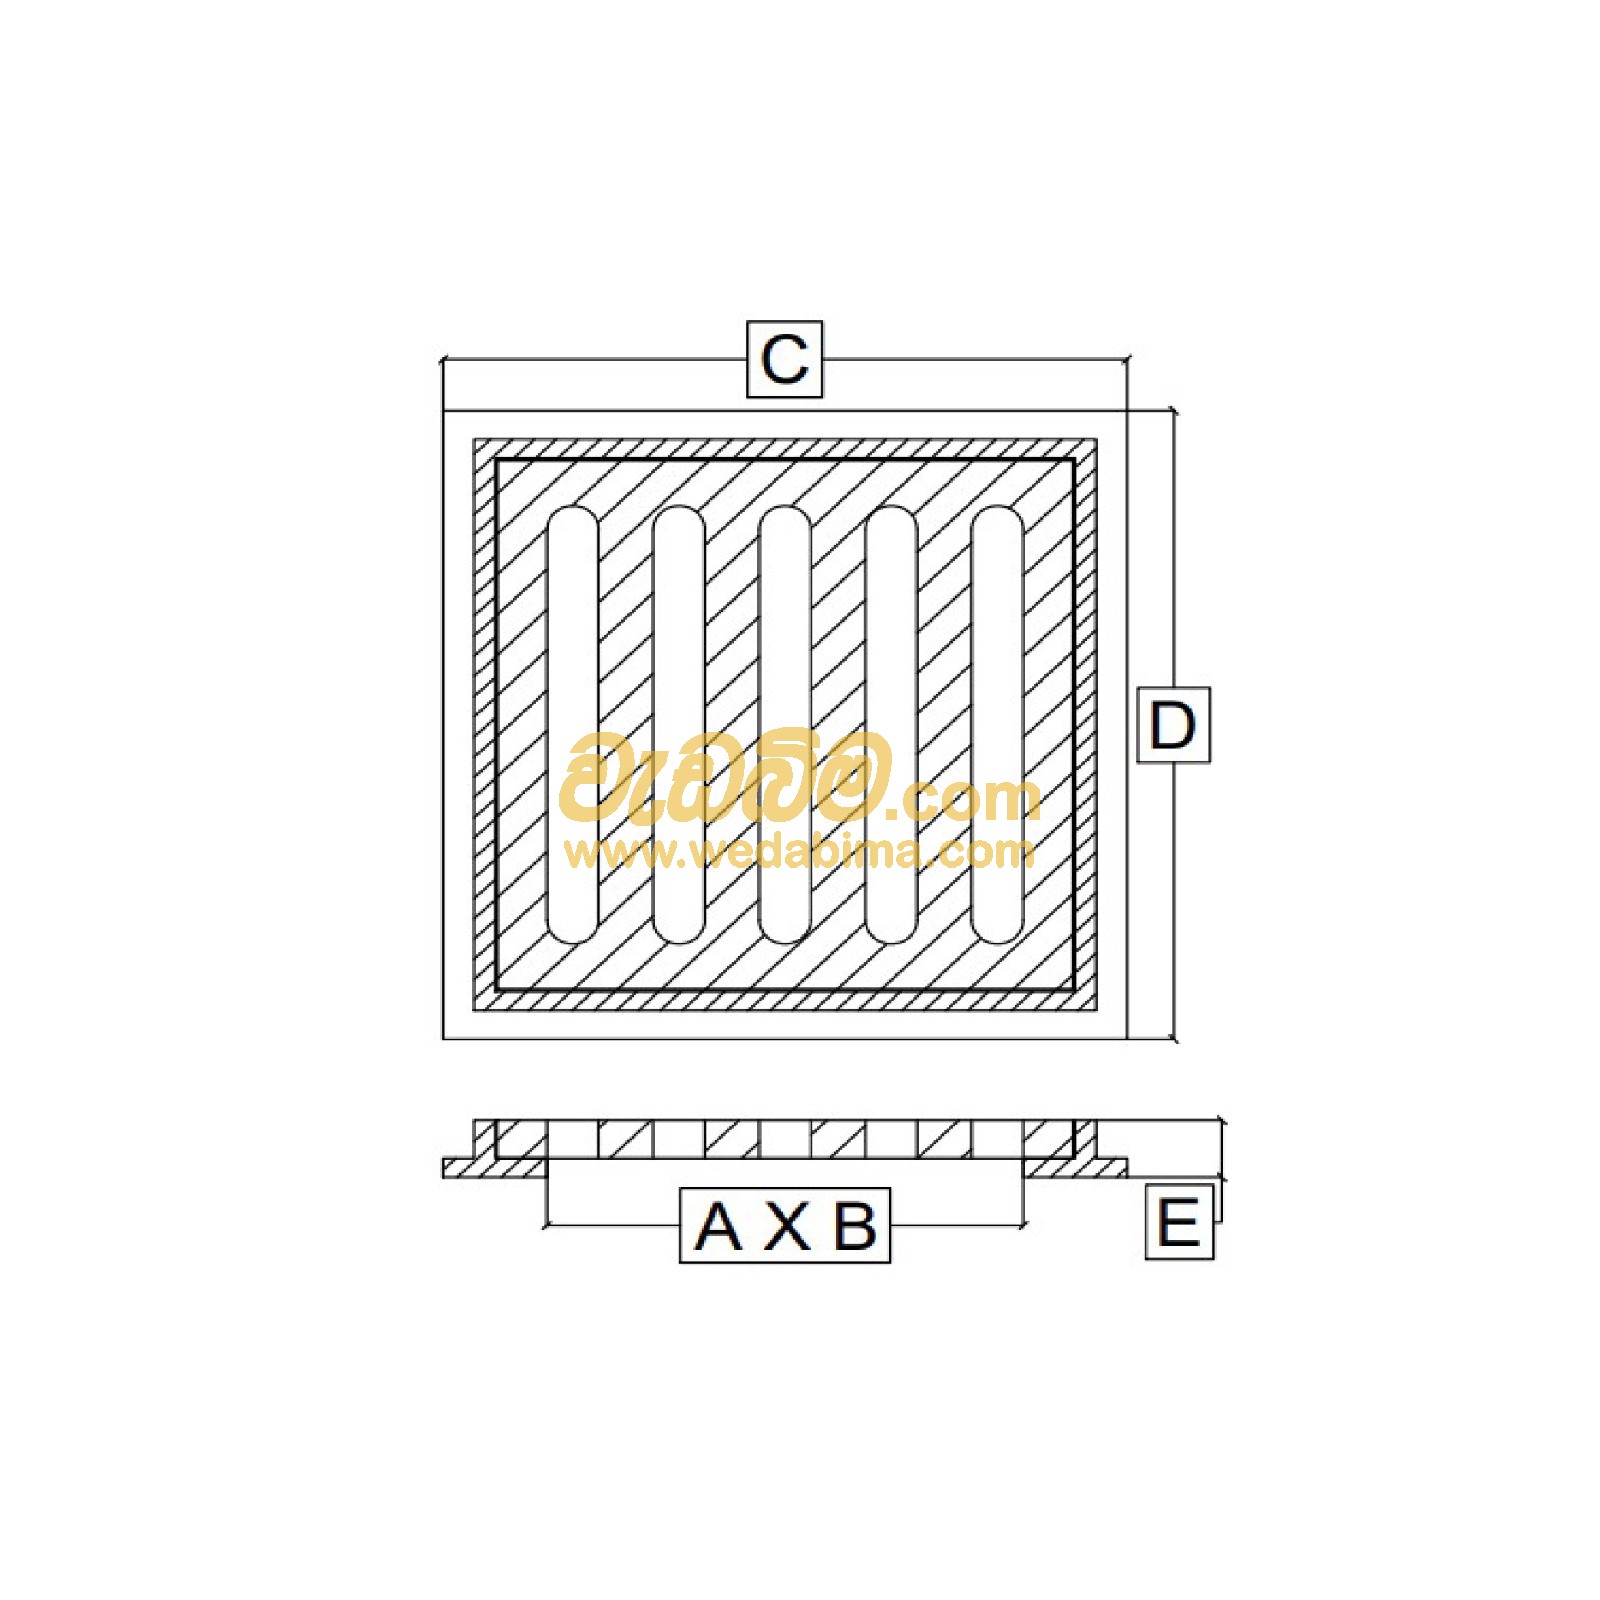 Cover image for 200mm x 200mm Cast-iron Grating cover